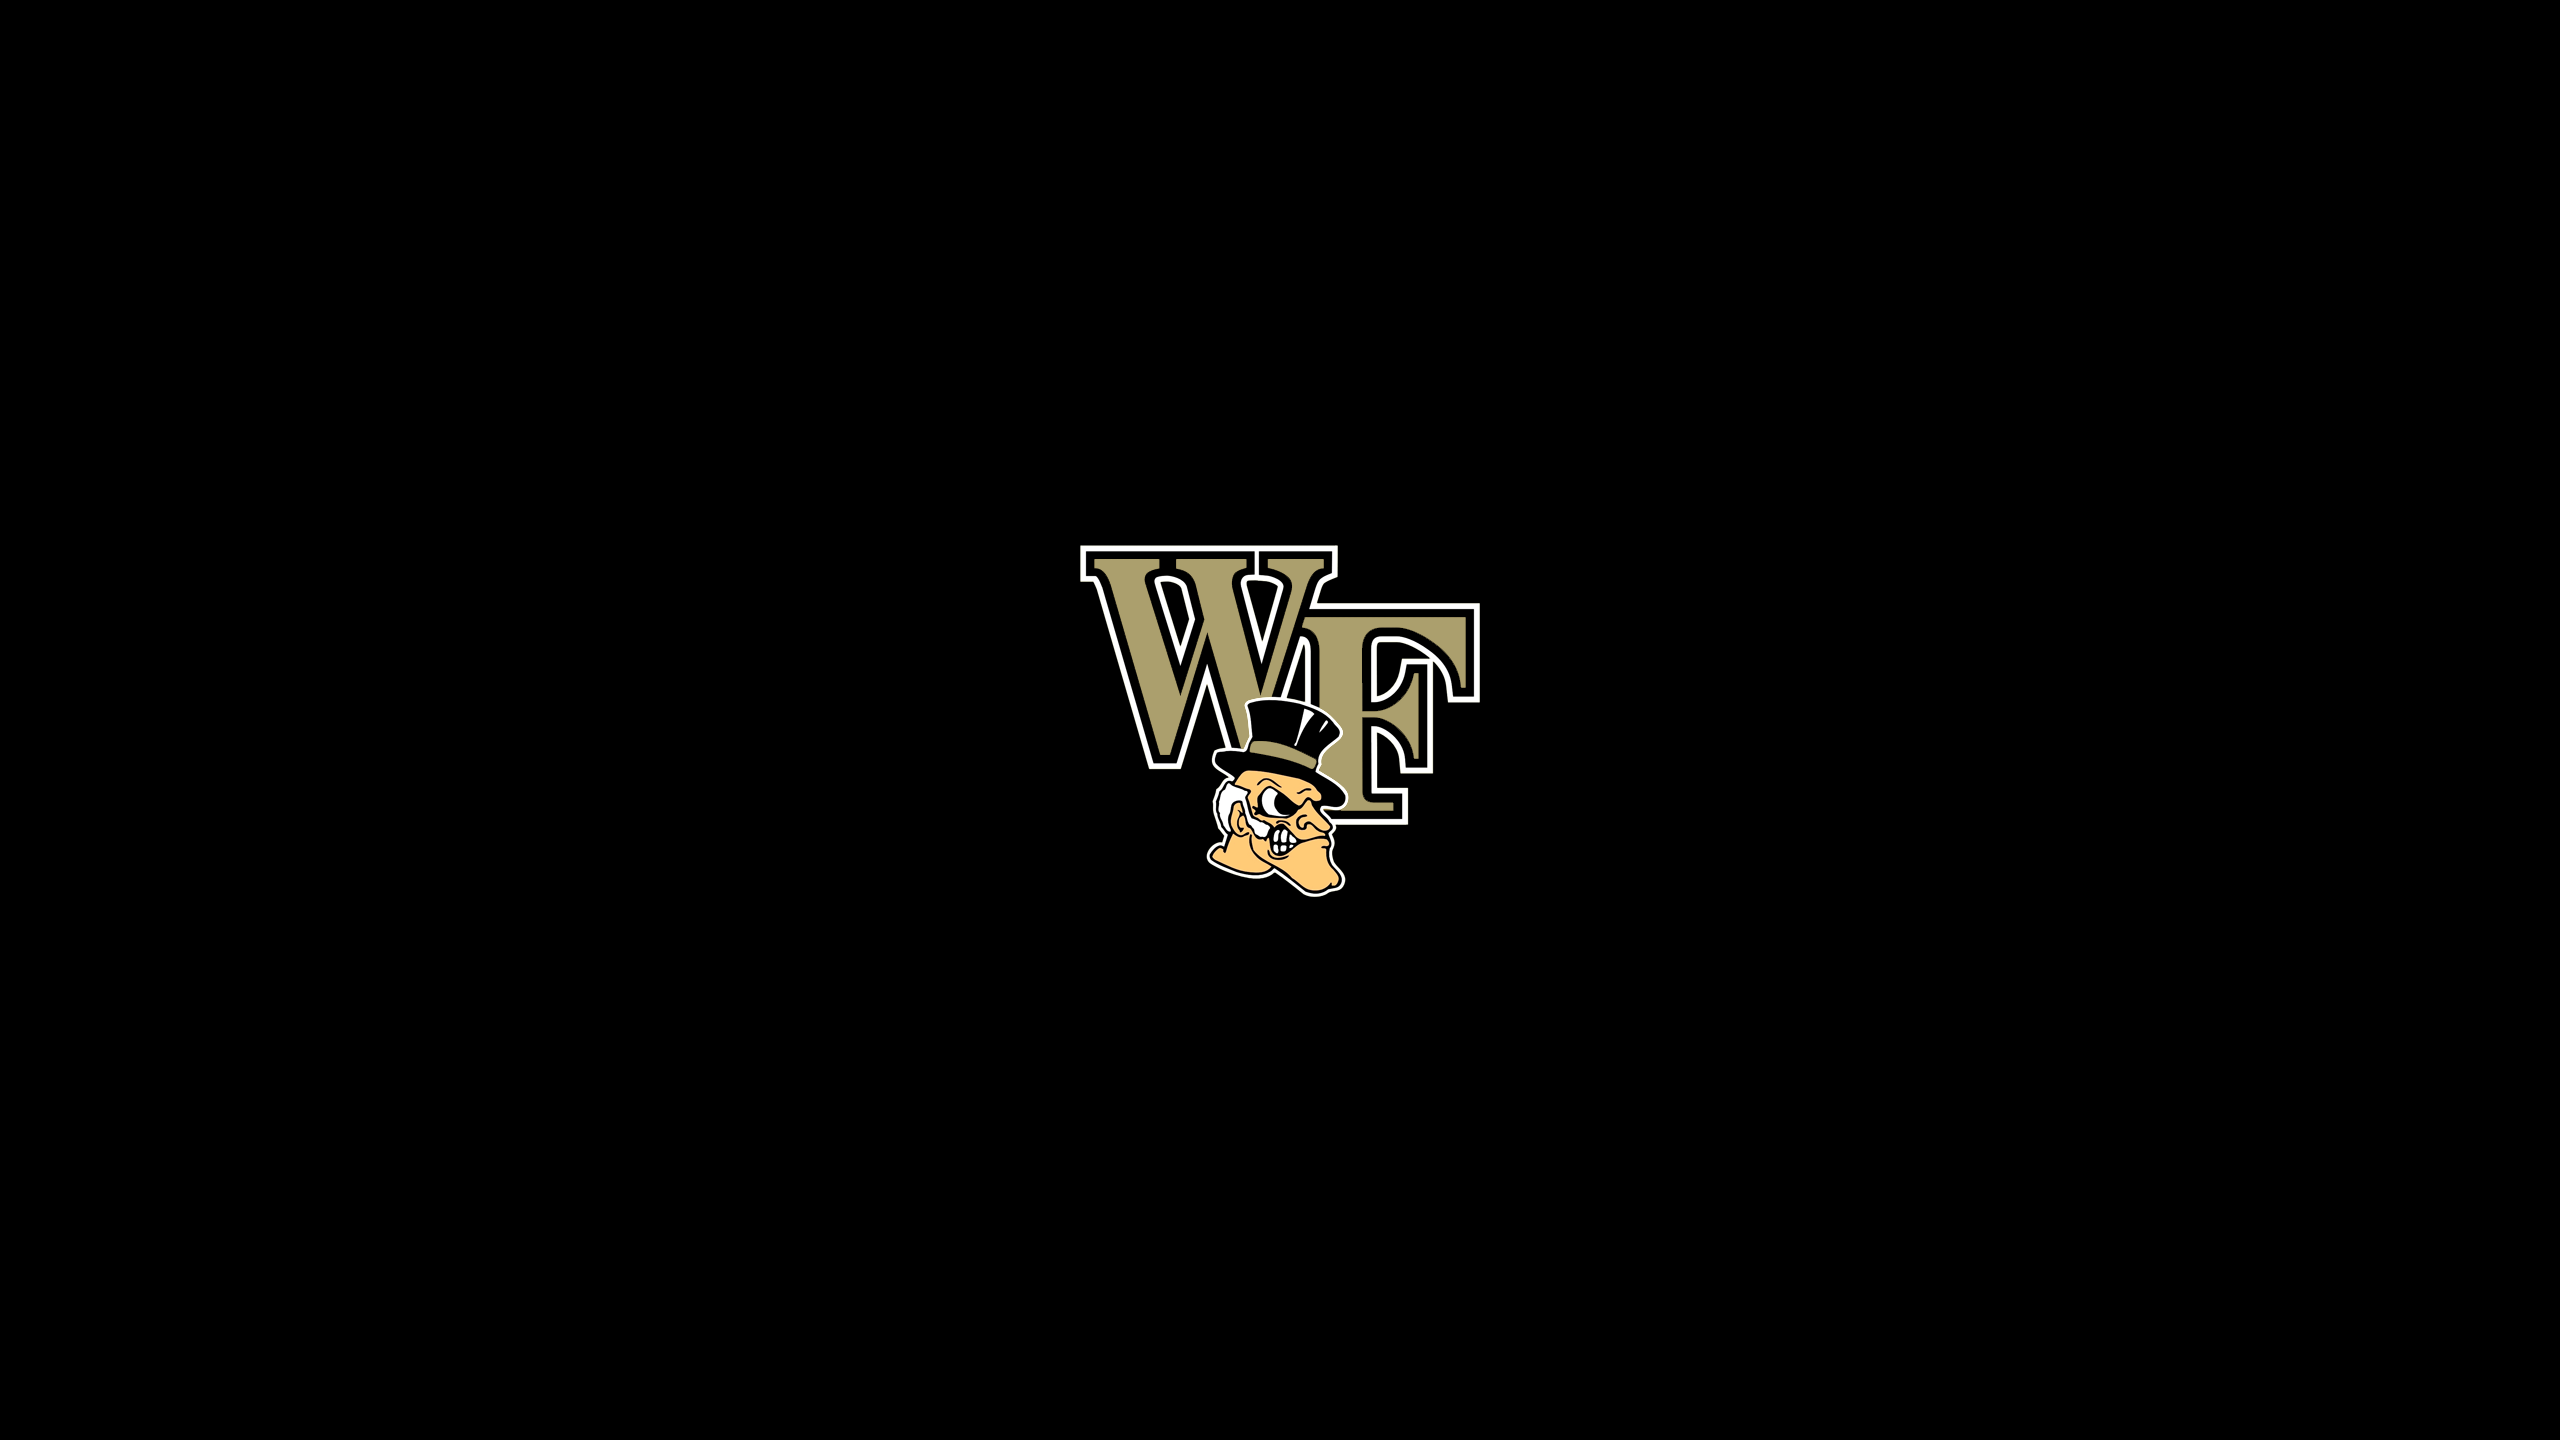 Wake Forest Demon Deacons Football - NCAAF - Square Bettor